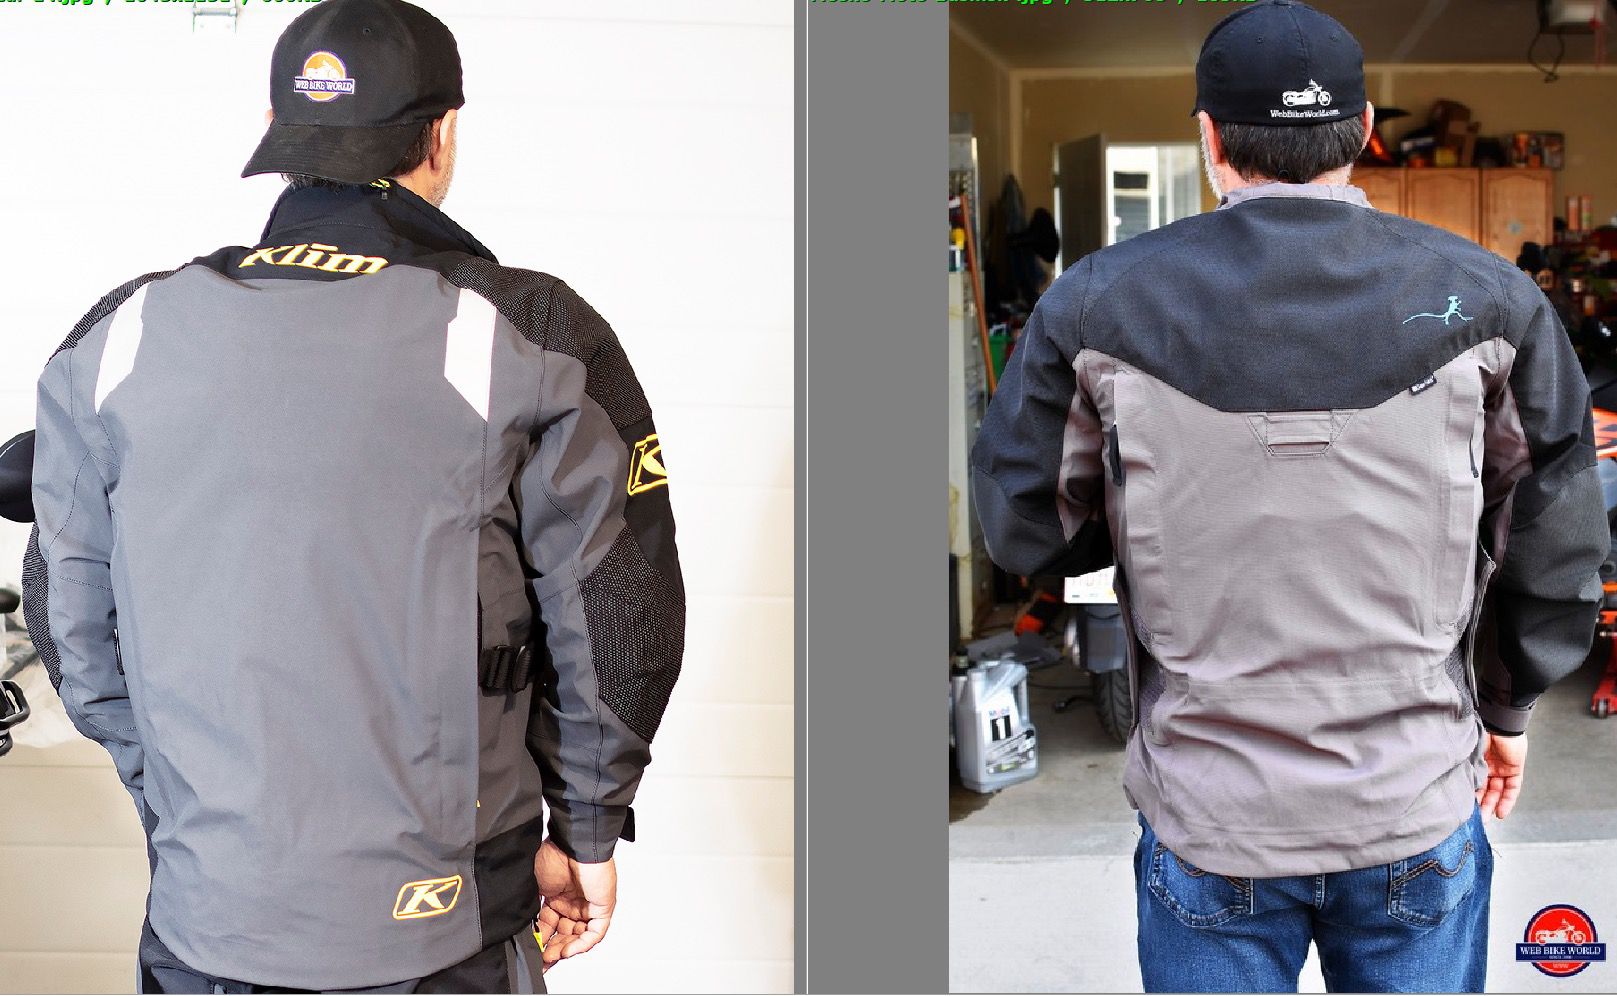 There’s a ton more Superfabric™ (black area) on the Basilisk jacket than on the Klim Raptor GTX.